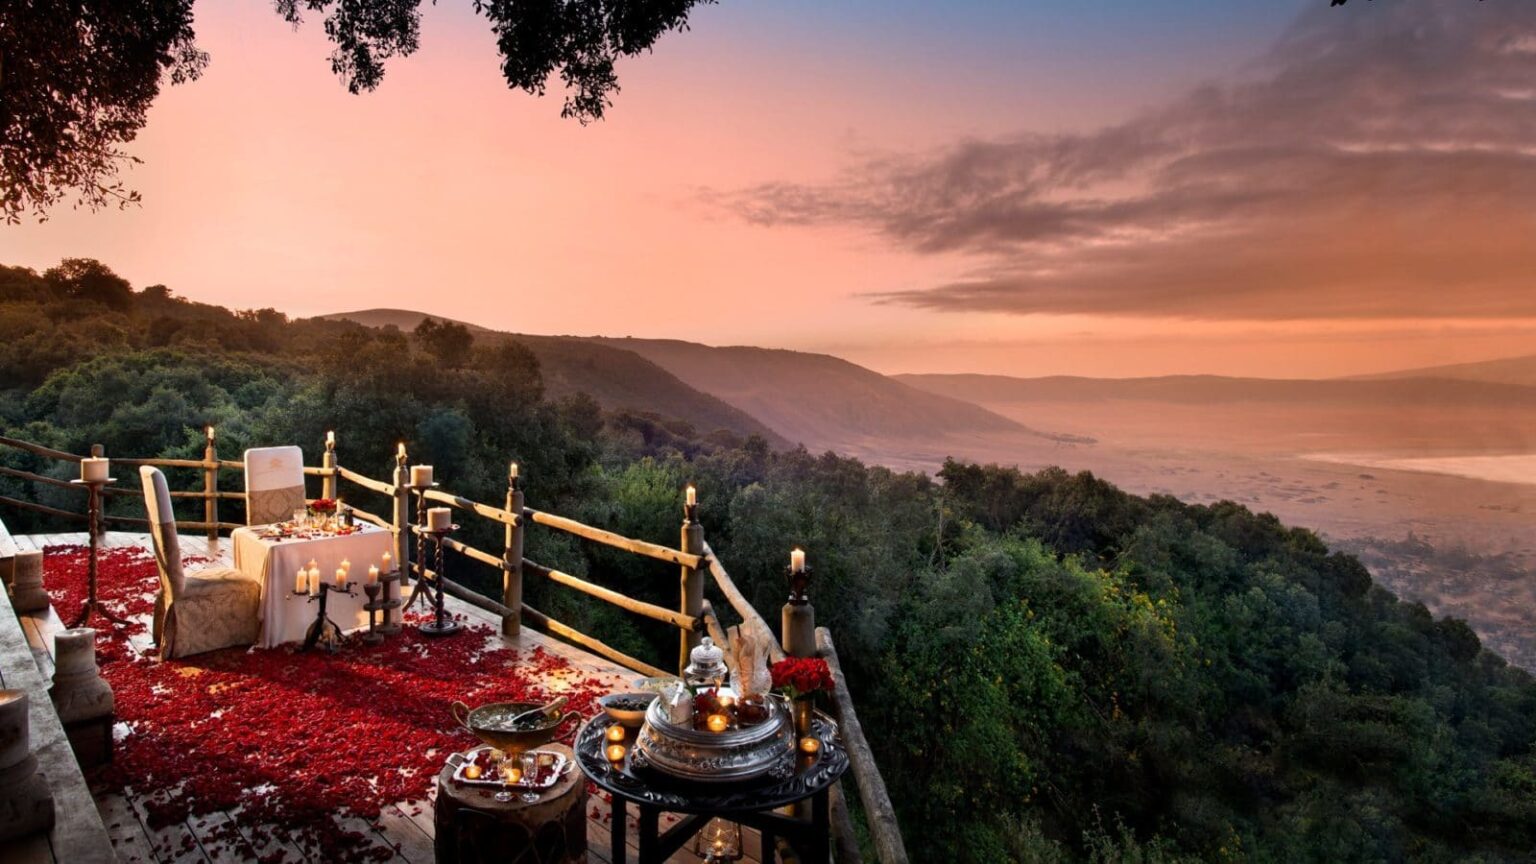 Honeymoon in Africa: Ideas for Your Romantic Escape